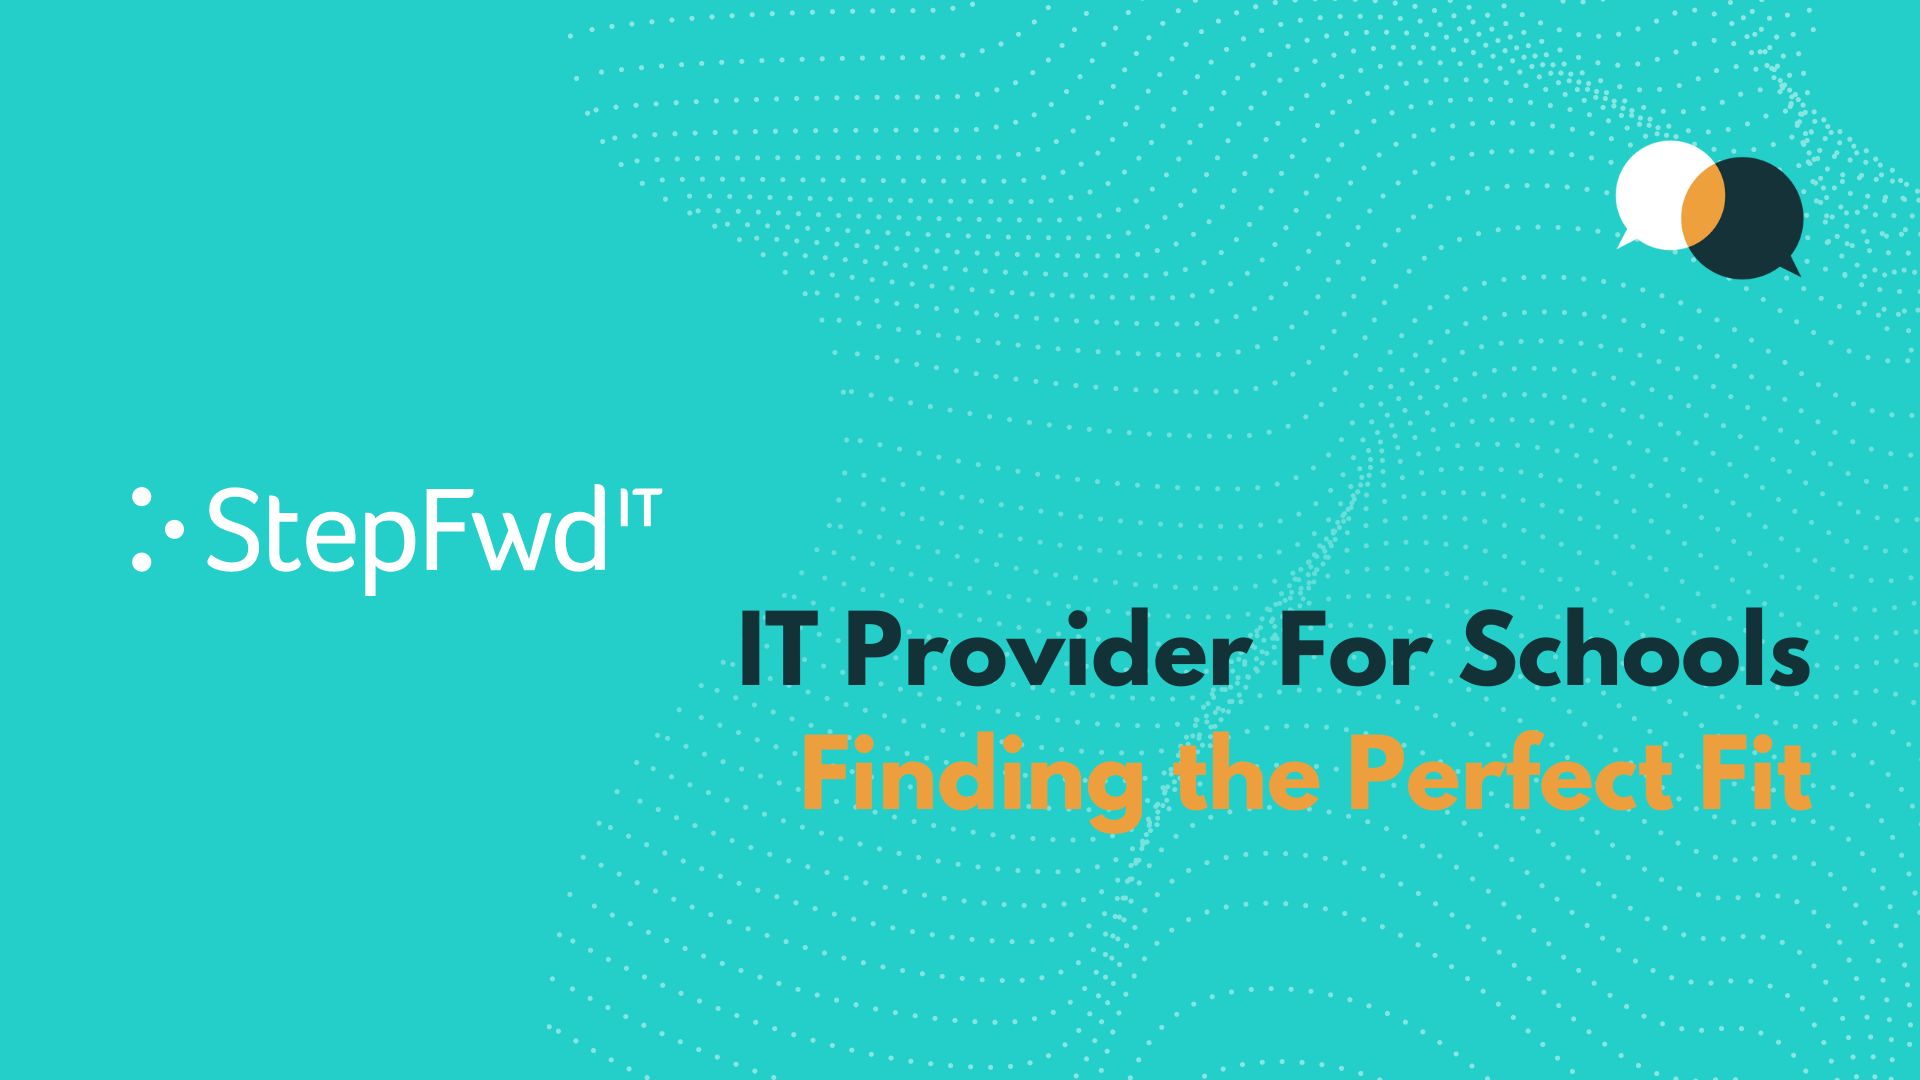 IT Provider For Schools: Finding the Perfect Fit